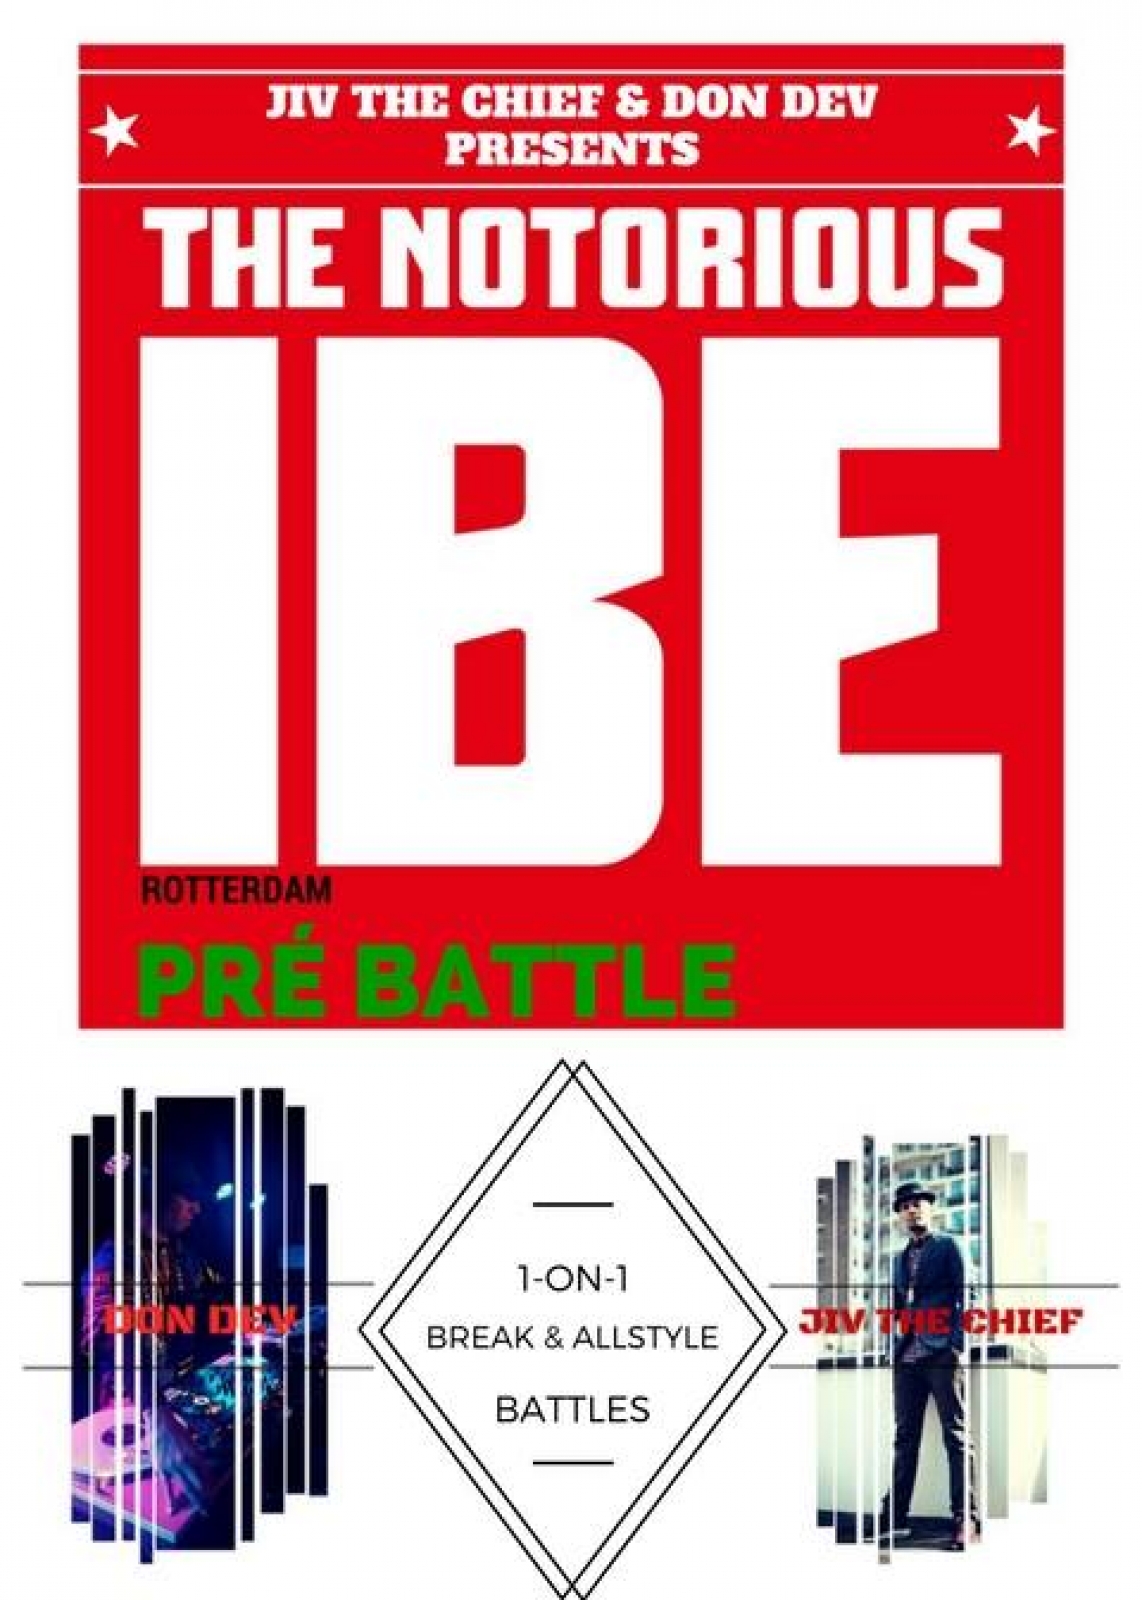 The Notorious IBE - Pre Battle 2017 poster